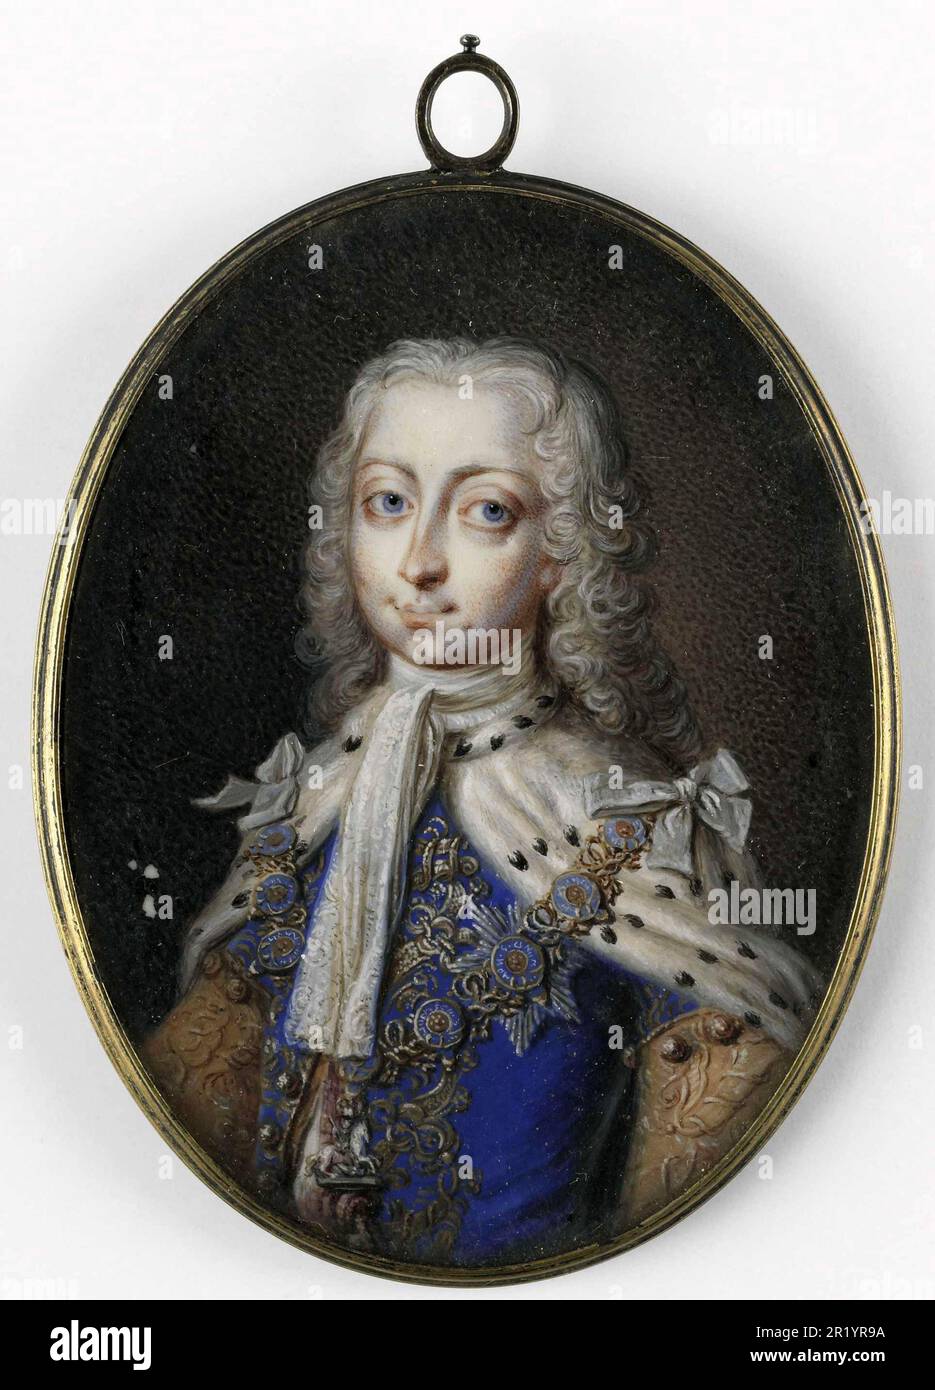 Frederick Louis (1707-51), Prince of Wales. Son of King George II, painting by Philippe Mercier, Historic, digitally restored reproduction of a historic original  /  Frederick Louis (1707-51), Prince of Wales. Son of King George II., Gemälde von Philippe Mercier, Historisch, digital restaurierte Reproduktion einer historischen Vorlage Stock Photo